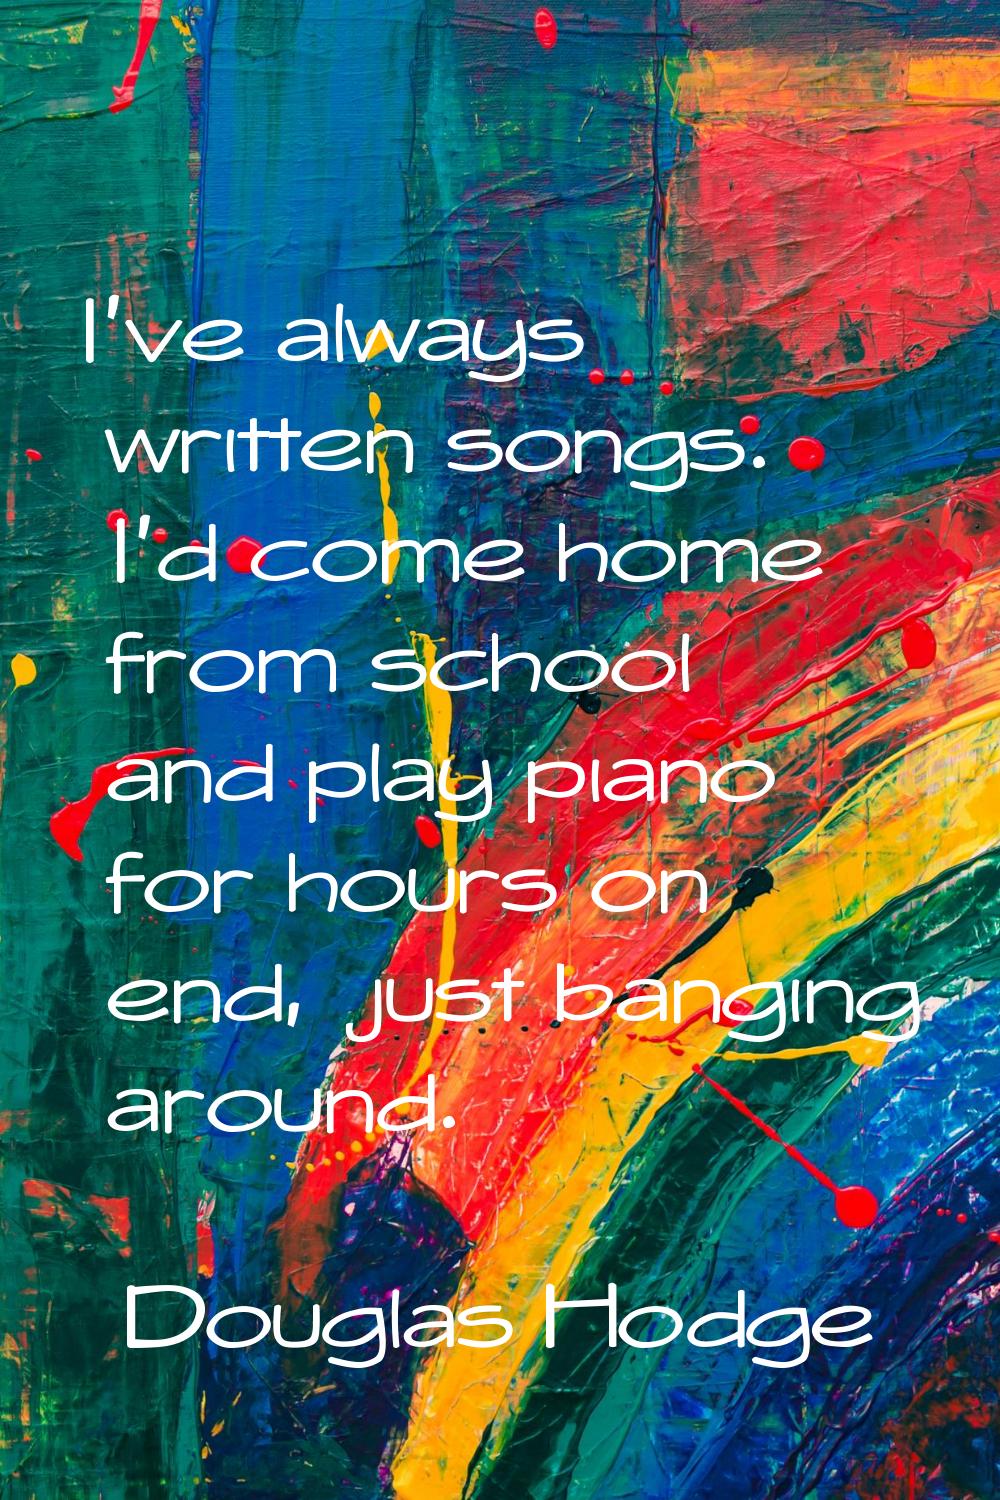 I've always written songs. I'd come home from school and play piano for hours on end, just banging 